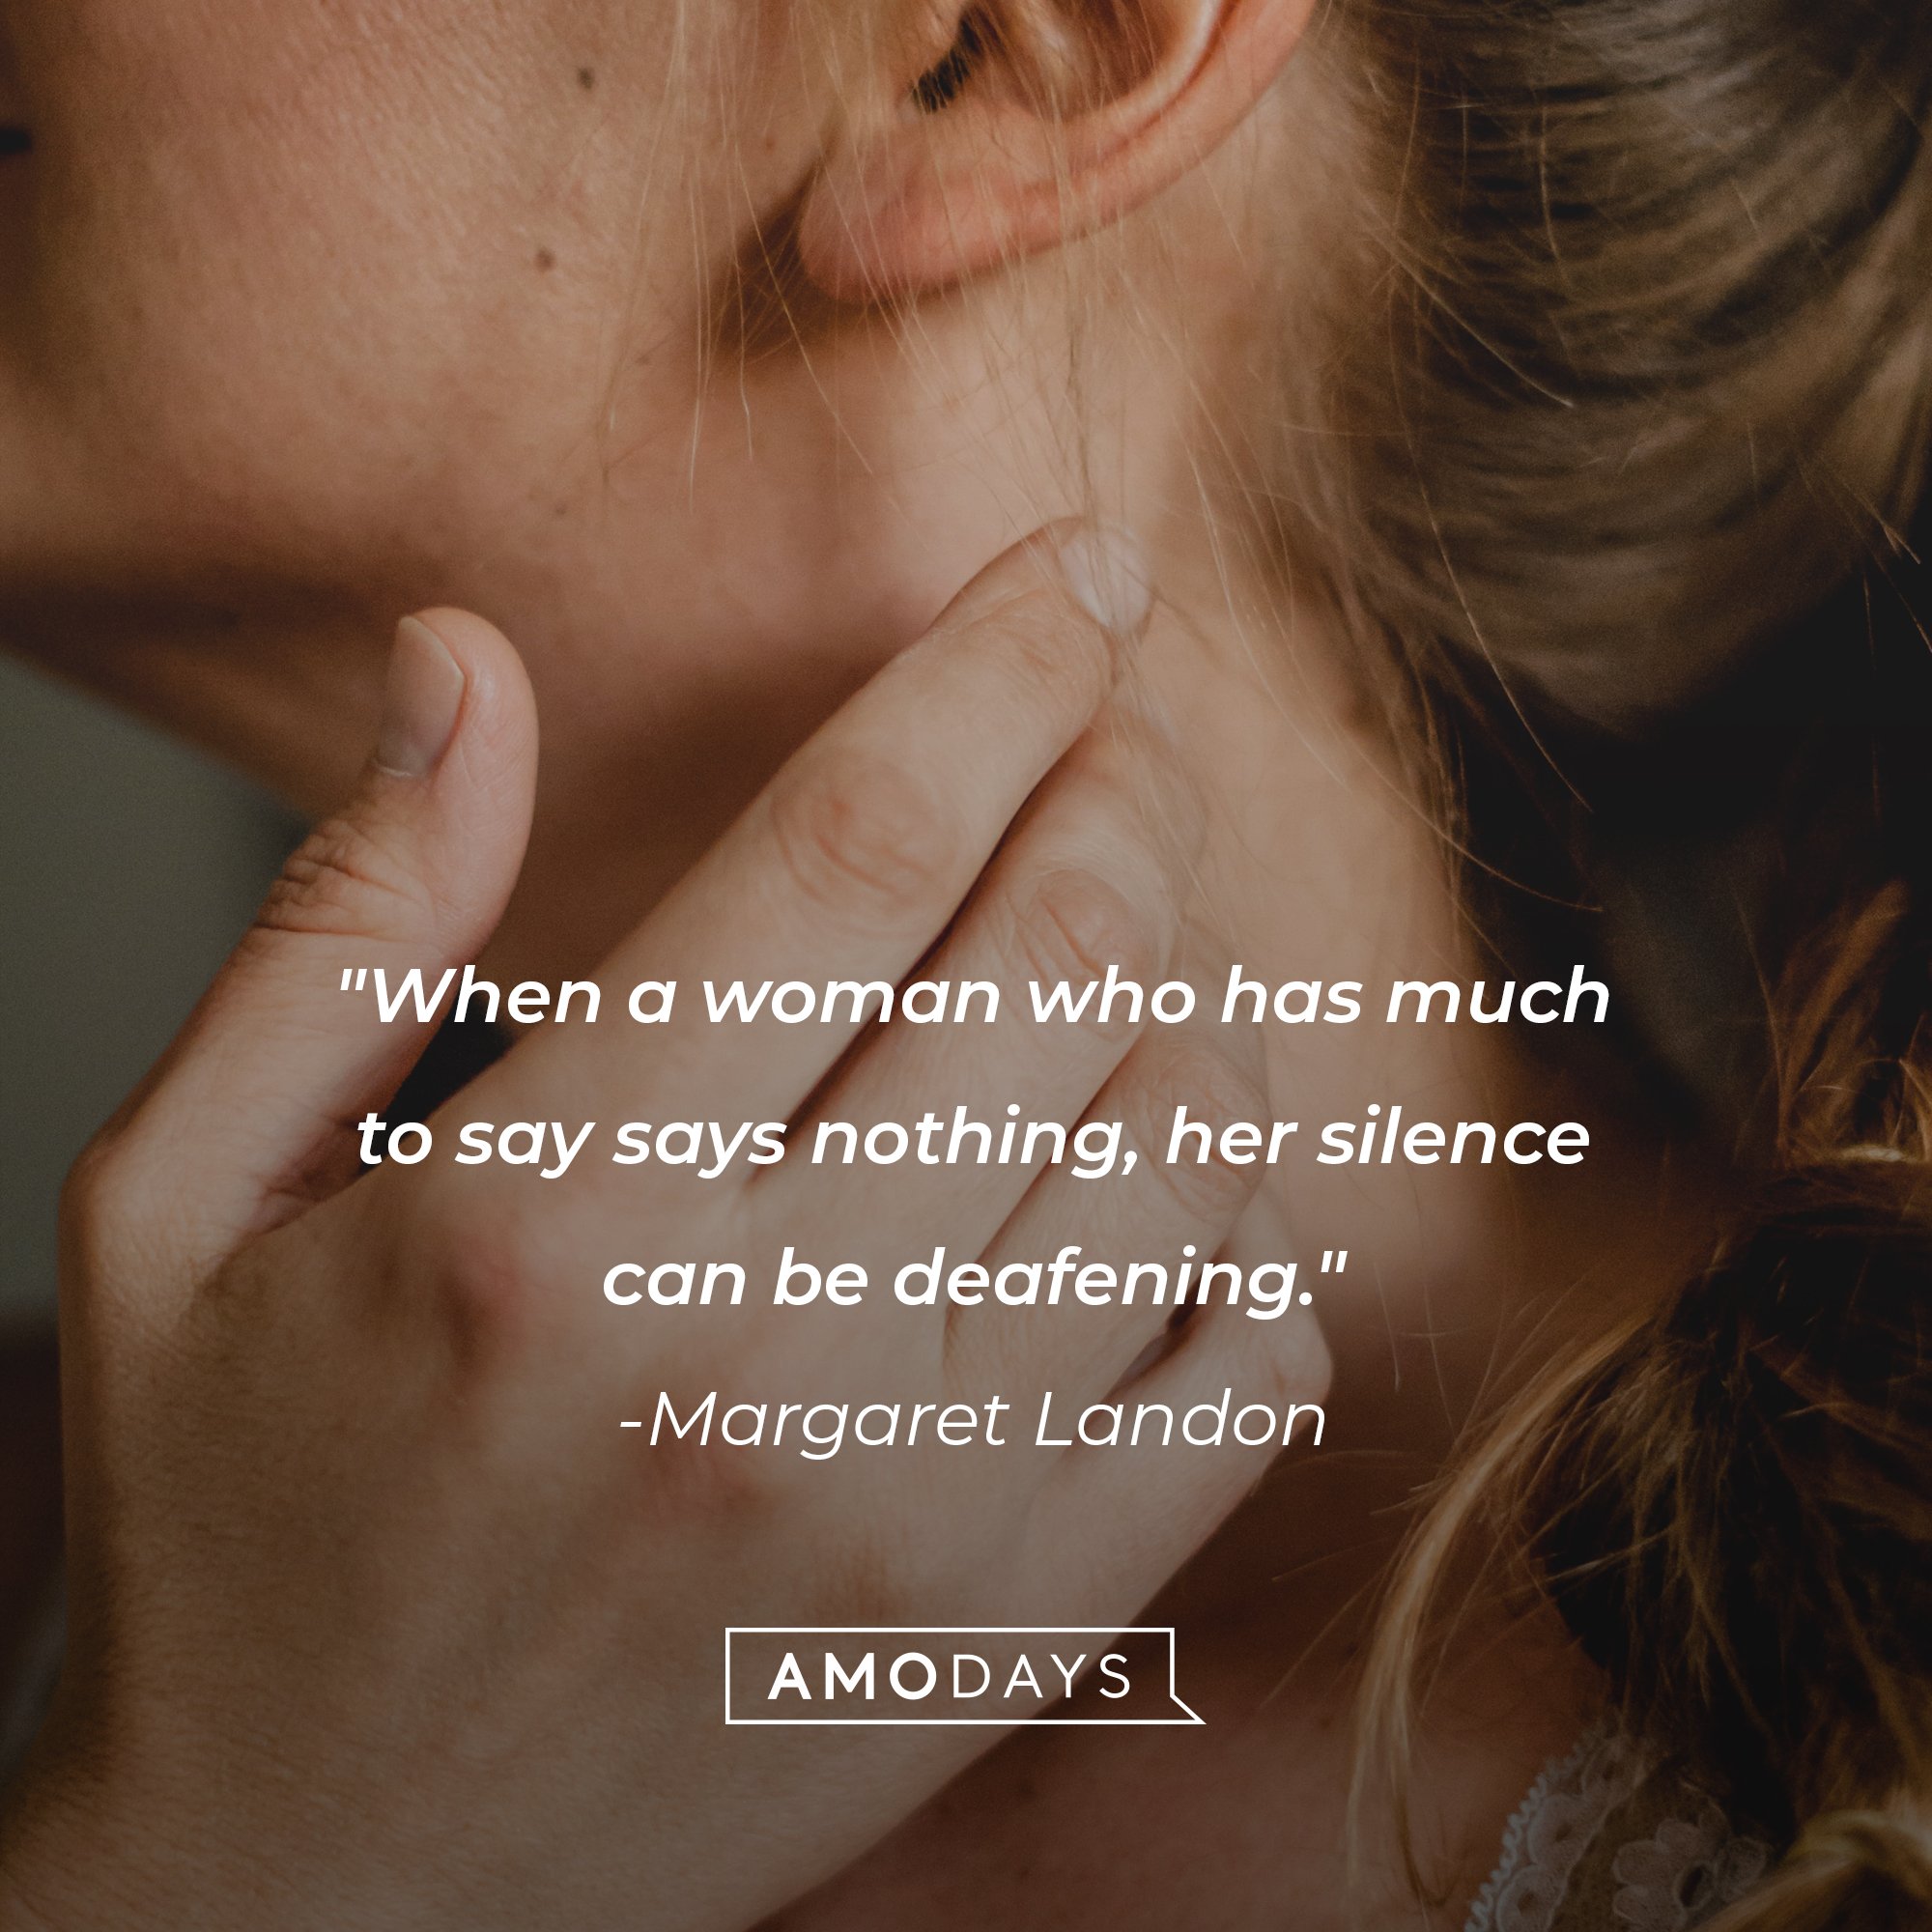 Margaret Landon’s quote:  When a woman who has much to say says nothing, her silence can be deafening." | Image: AmoDays 